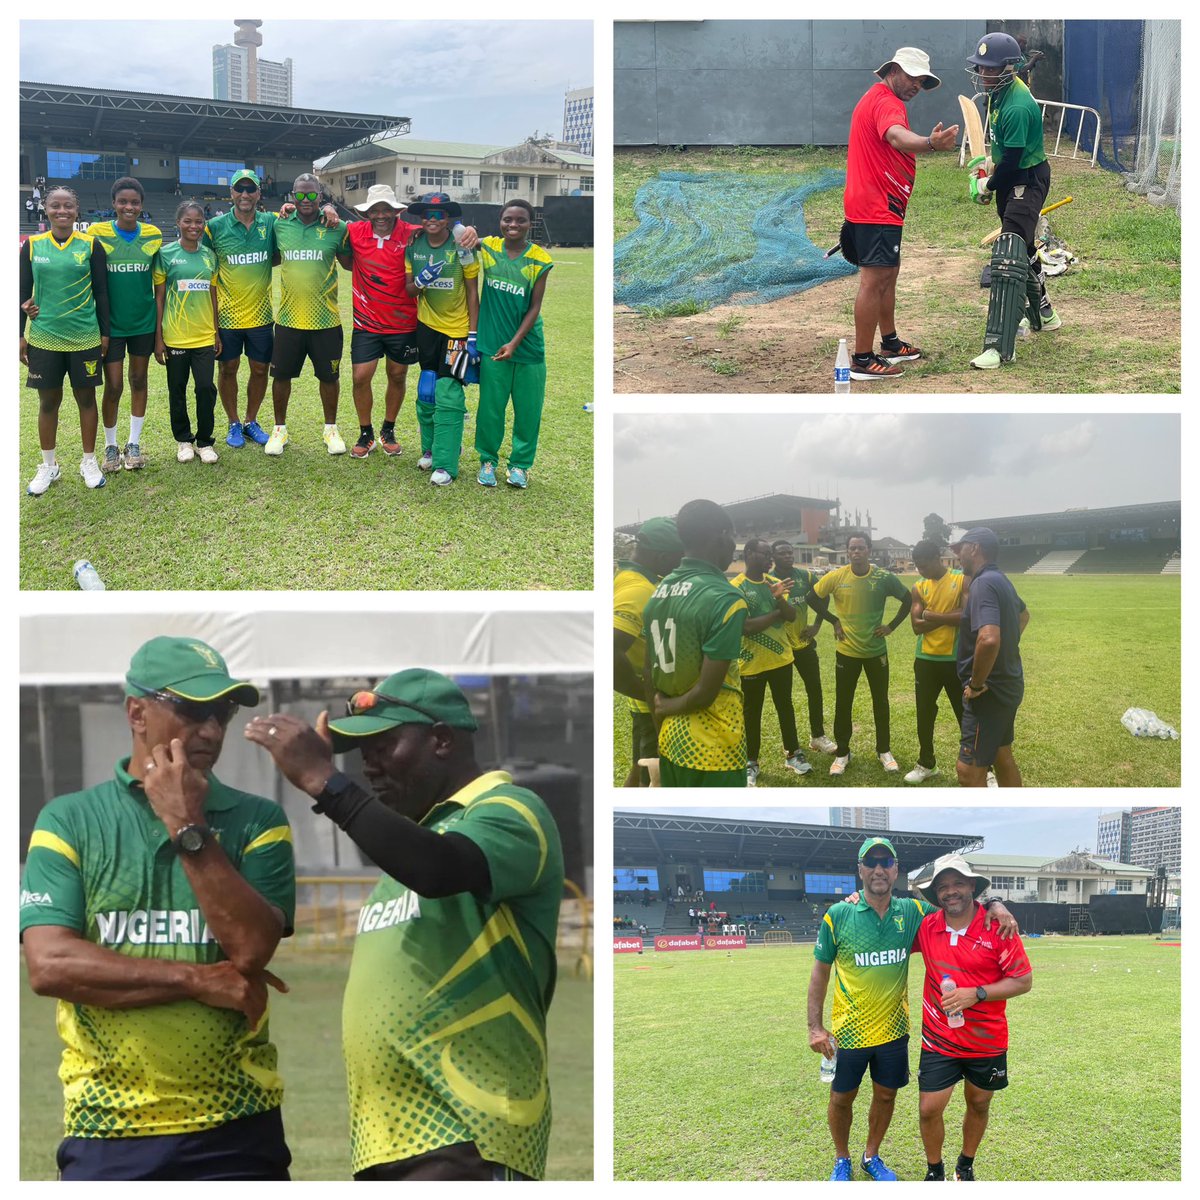 It’s been a privilege for the BarnesPrince Cricket Academy to be invited to assist Nigerian CF with the Men & Women’s Cricket teams in their preparation for the All Africa Games.There’s no shortage of talent and we look forward to watching their performances in the tournament.